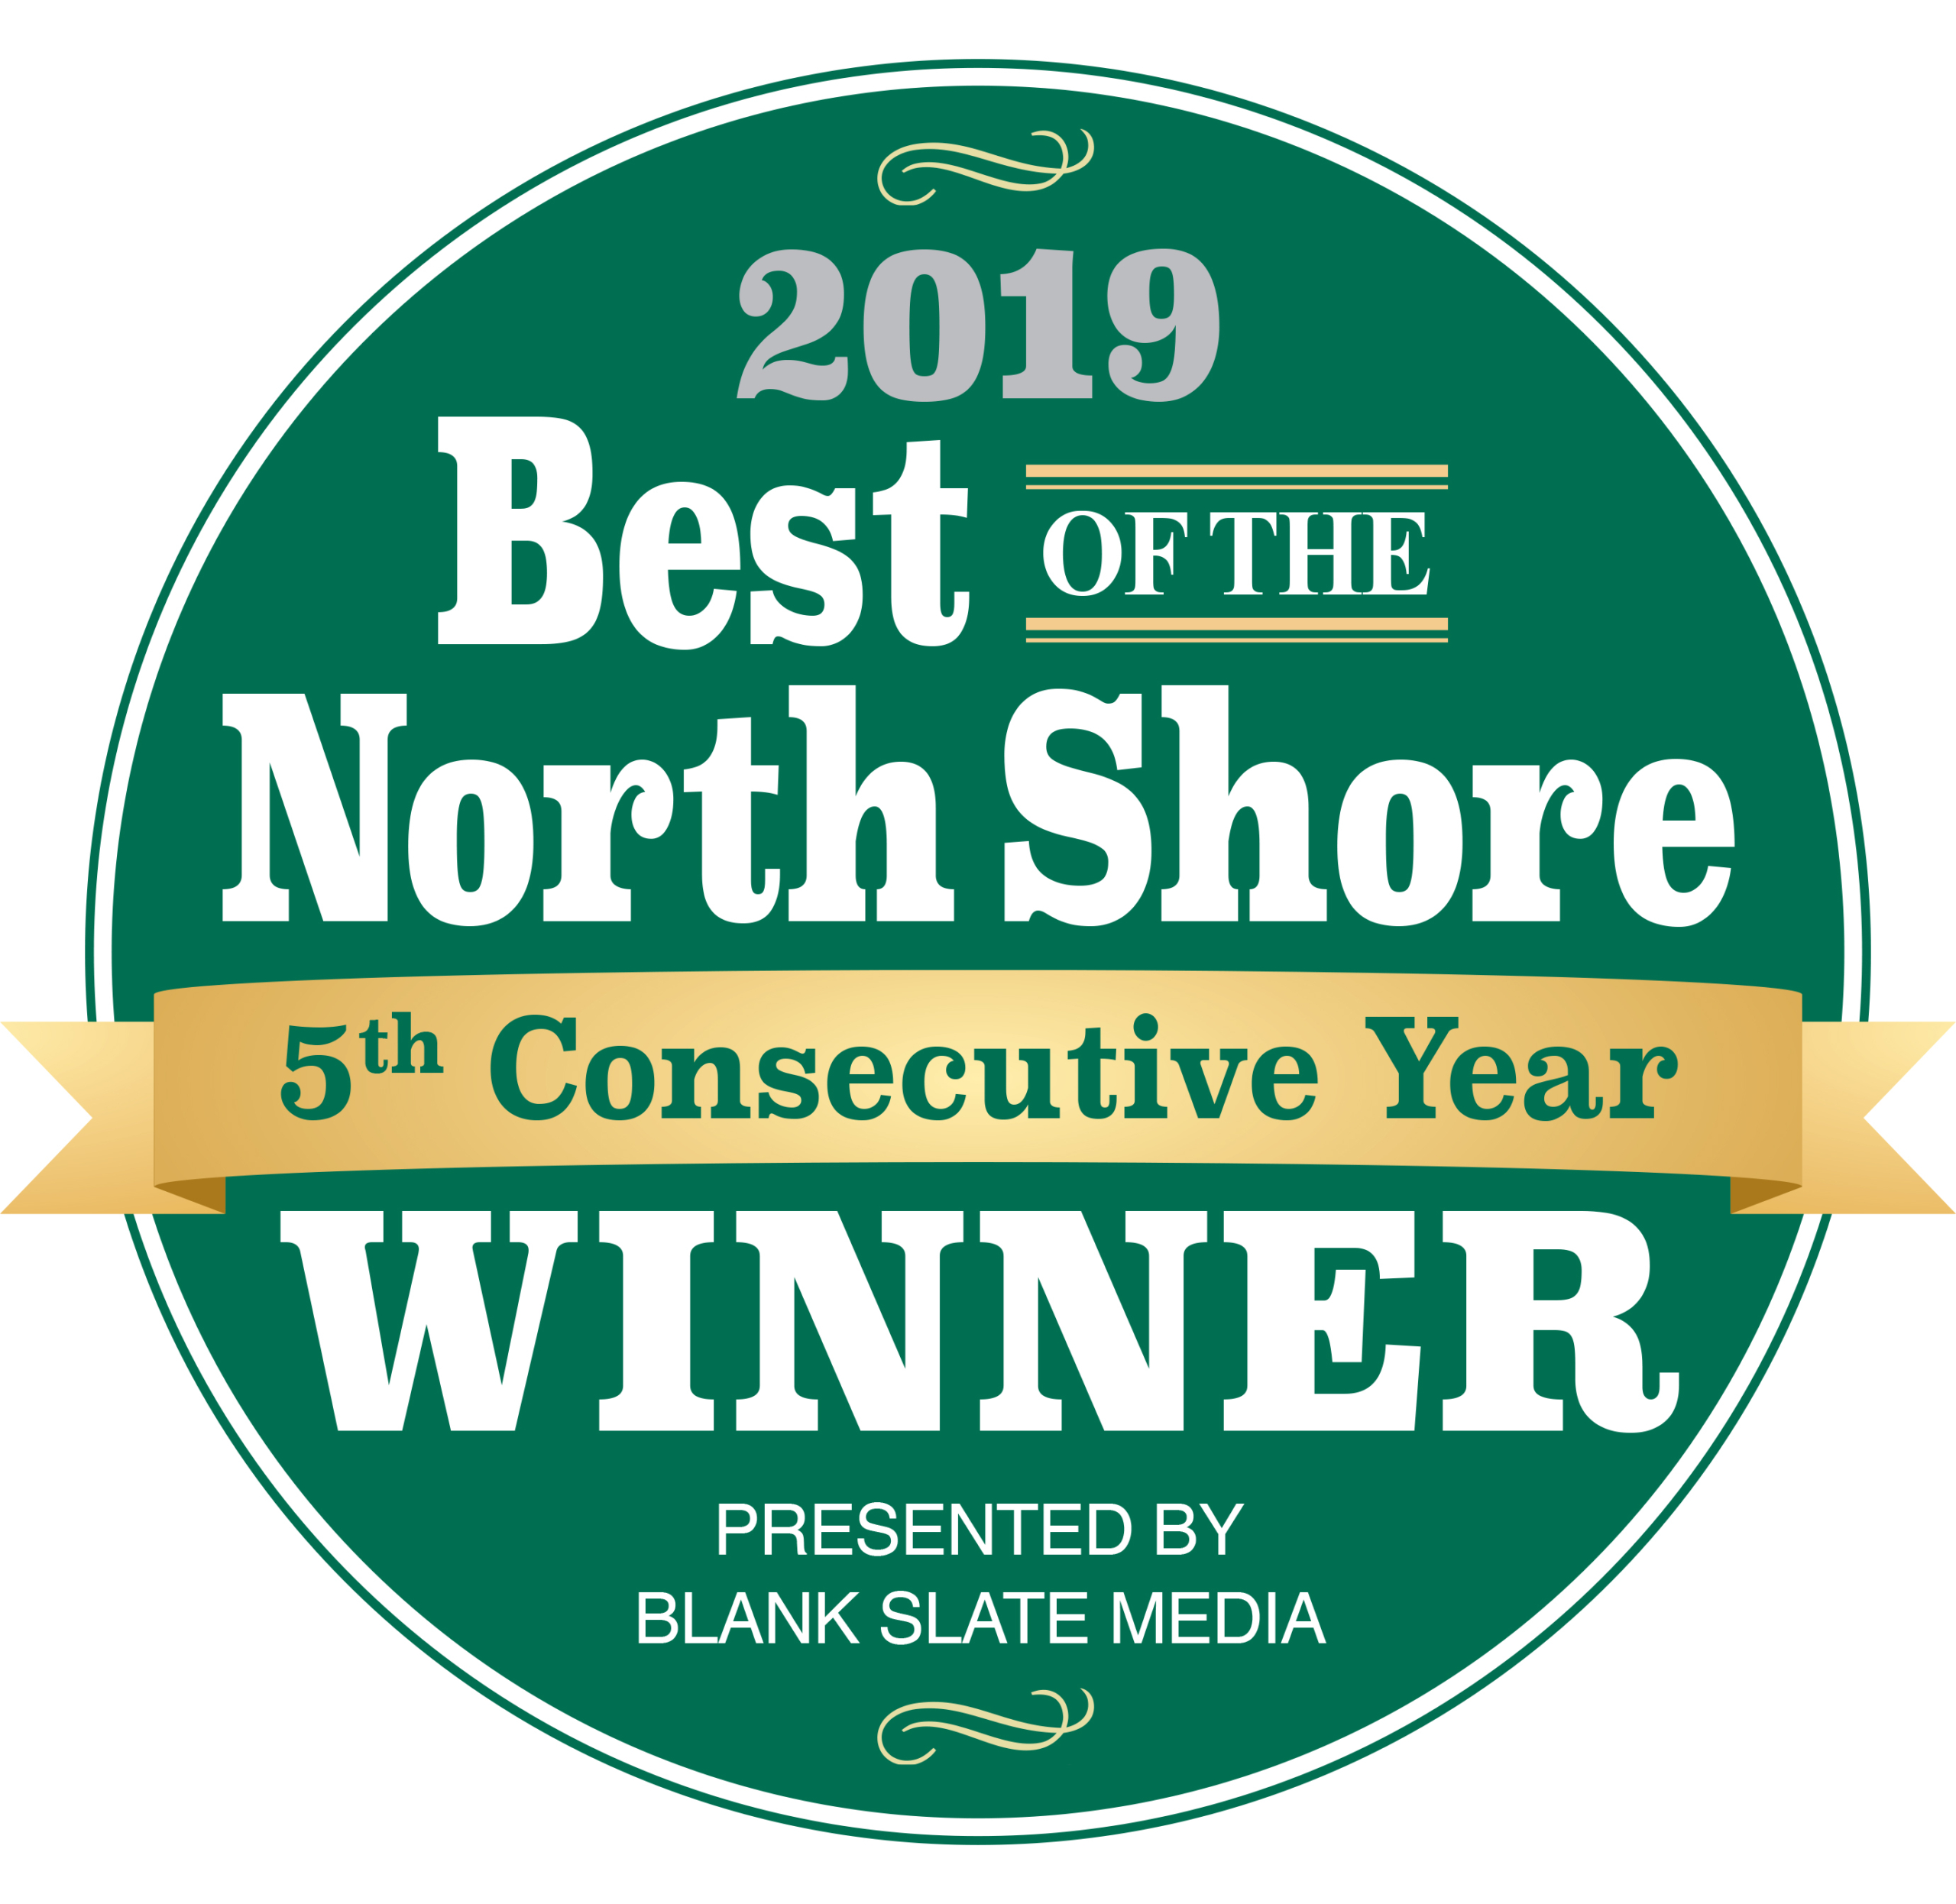 Best of the North Shore Winner 5th Consecutive Year Logo 2019 Long